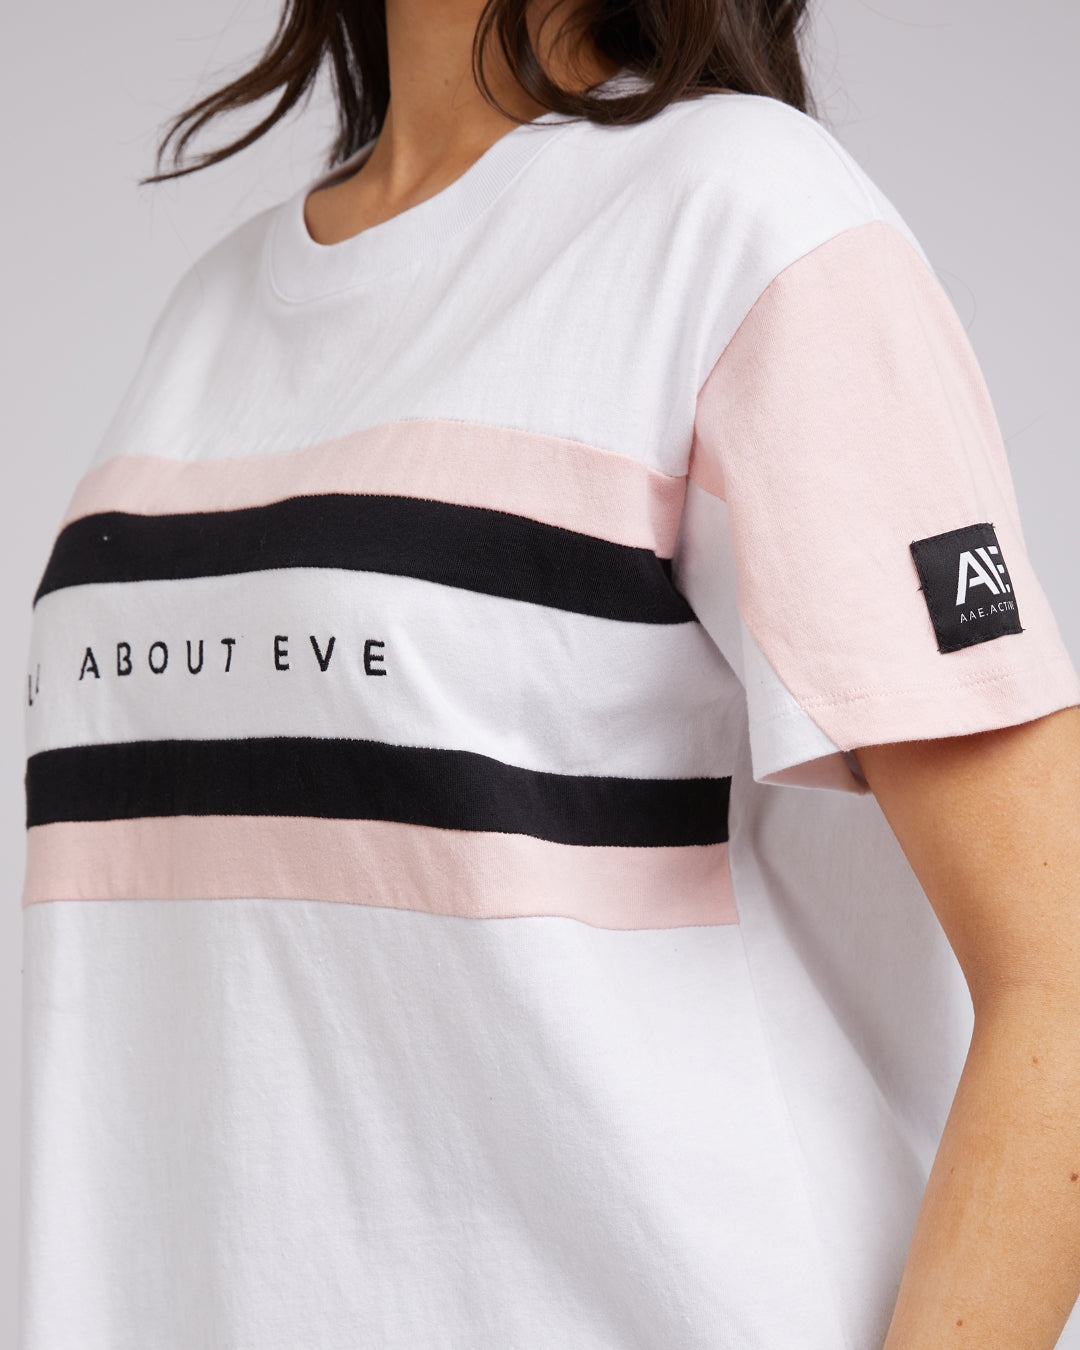 The Base Contrast Tee from All About Eve